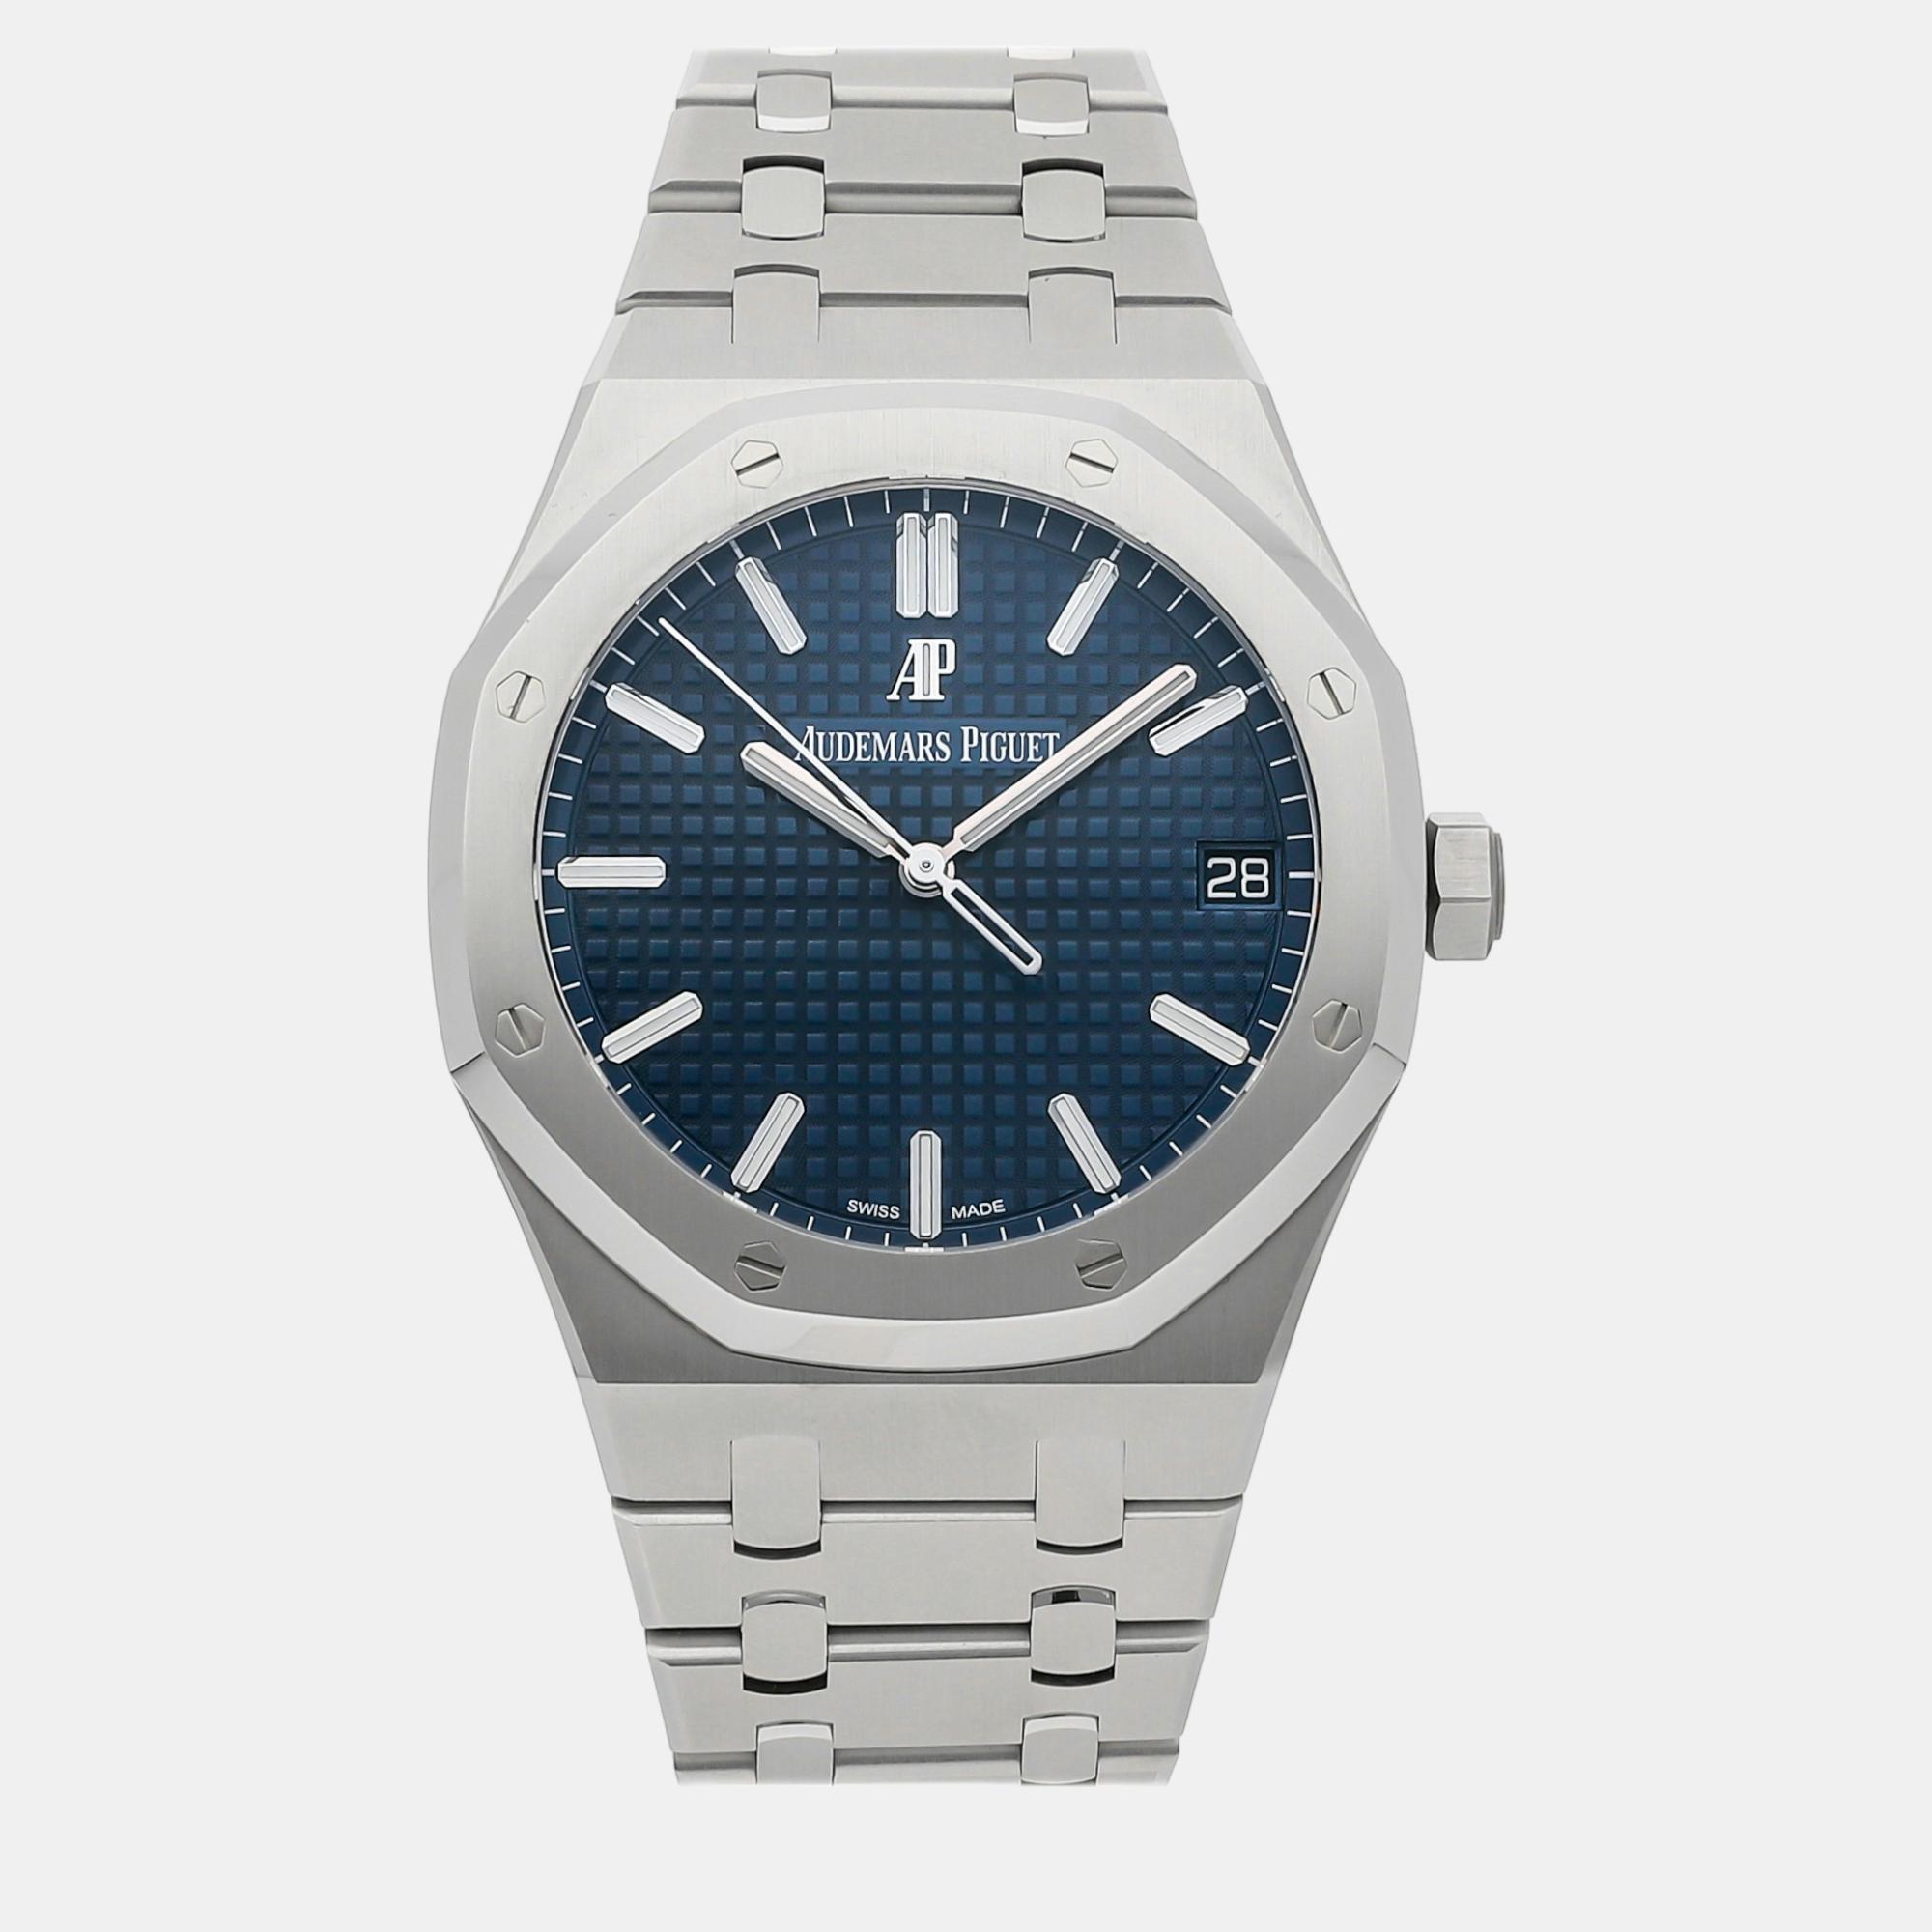 A timeless silhouette made of high quality materials and packed with precision and luxury makes this wristwatch the perfect choice for a sophisticated finish to any look. It is a grand creation to elevate the everyday experience.